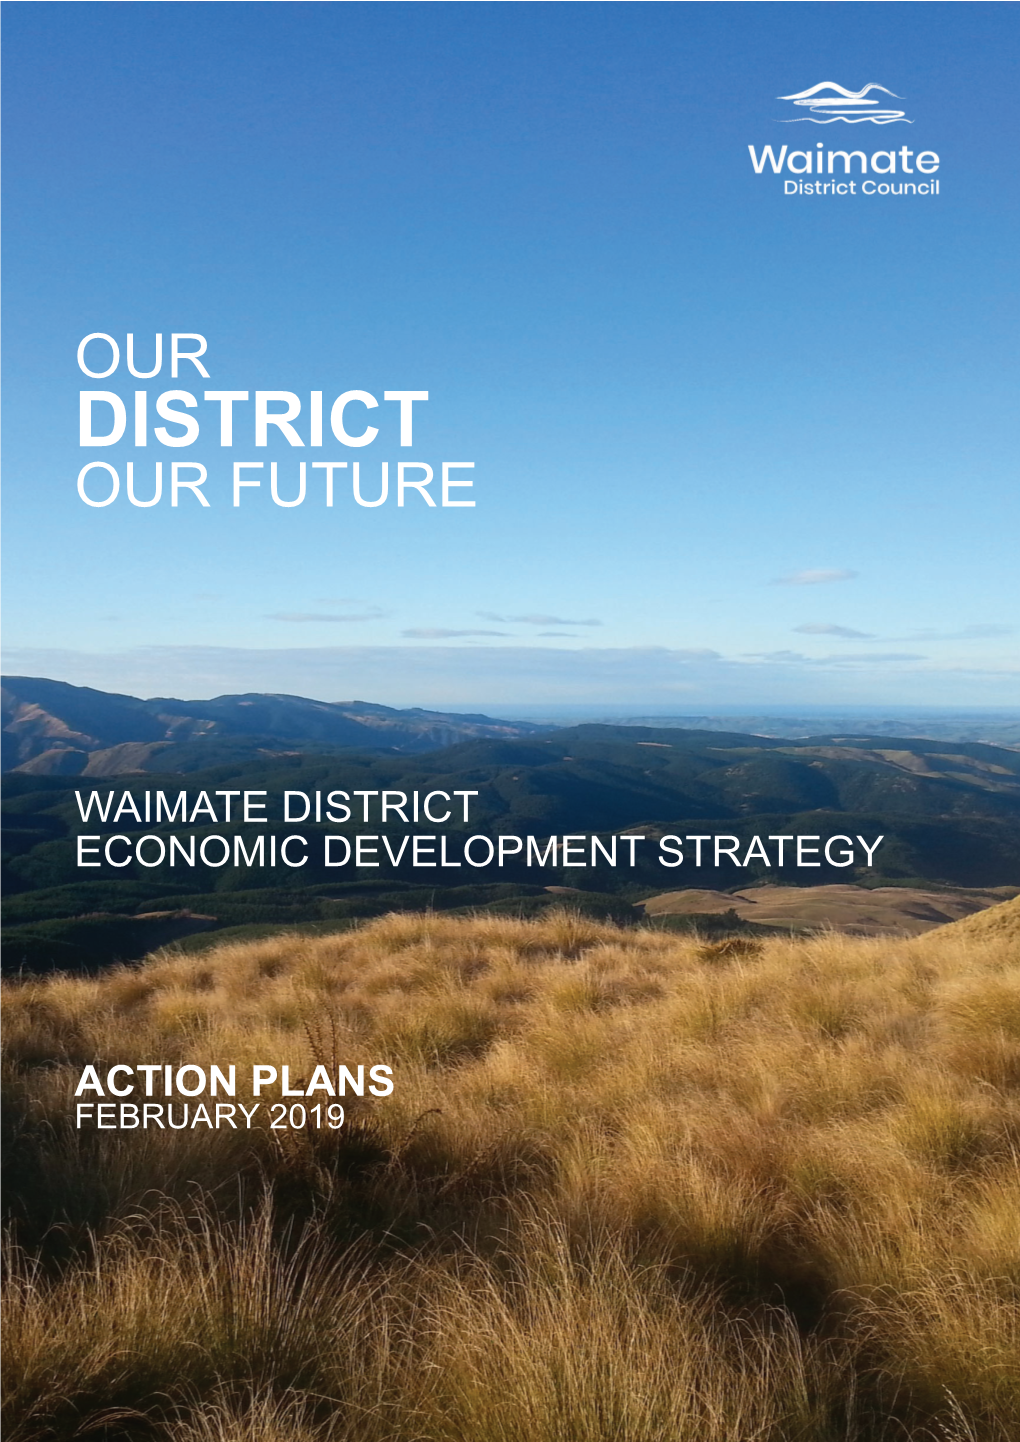 Economic Development Strategy Action Plans | February 2019 Infrastructure Improving ICT Connectivity And